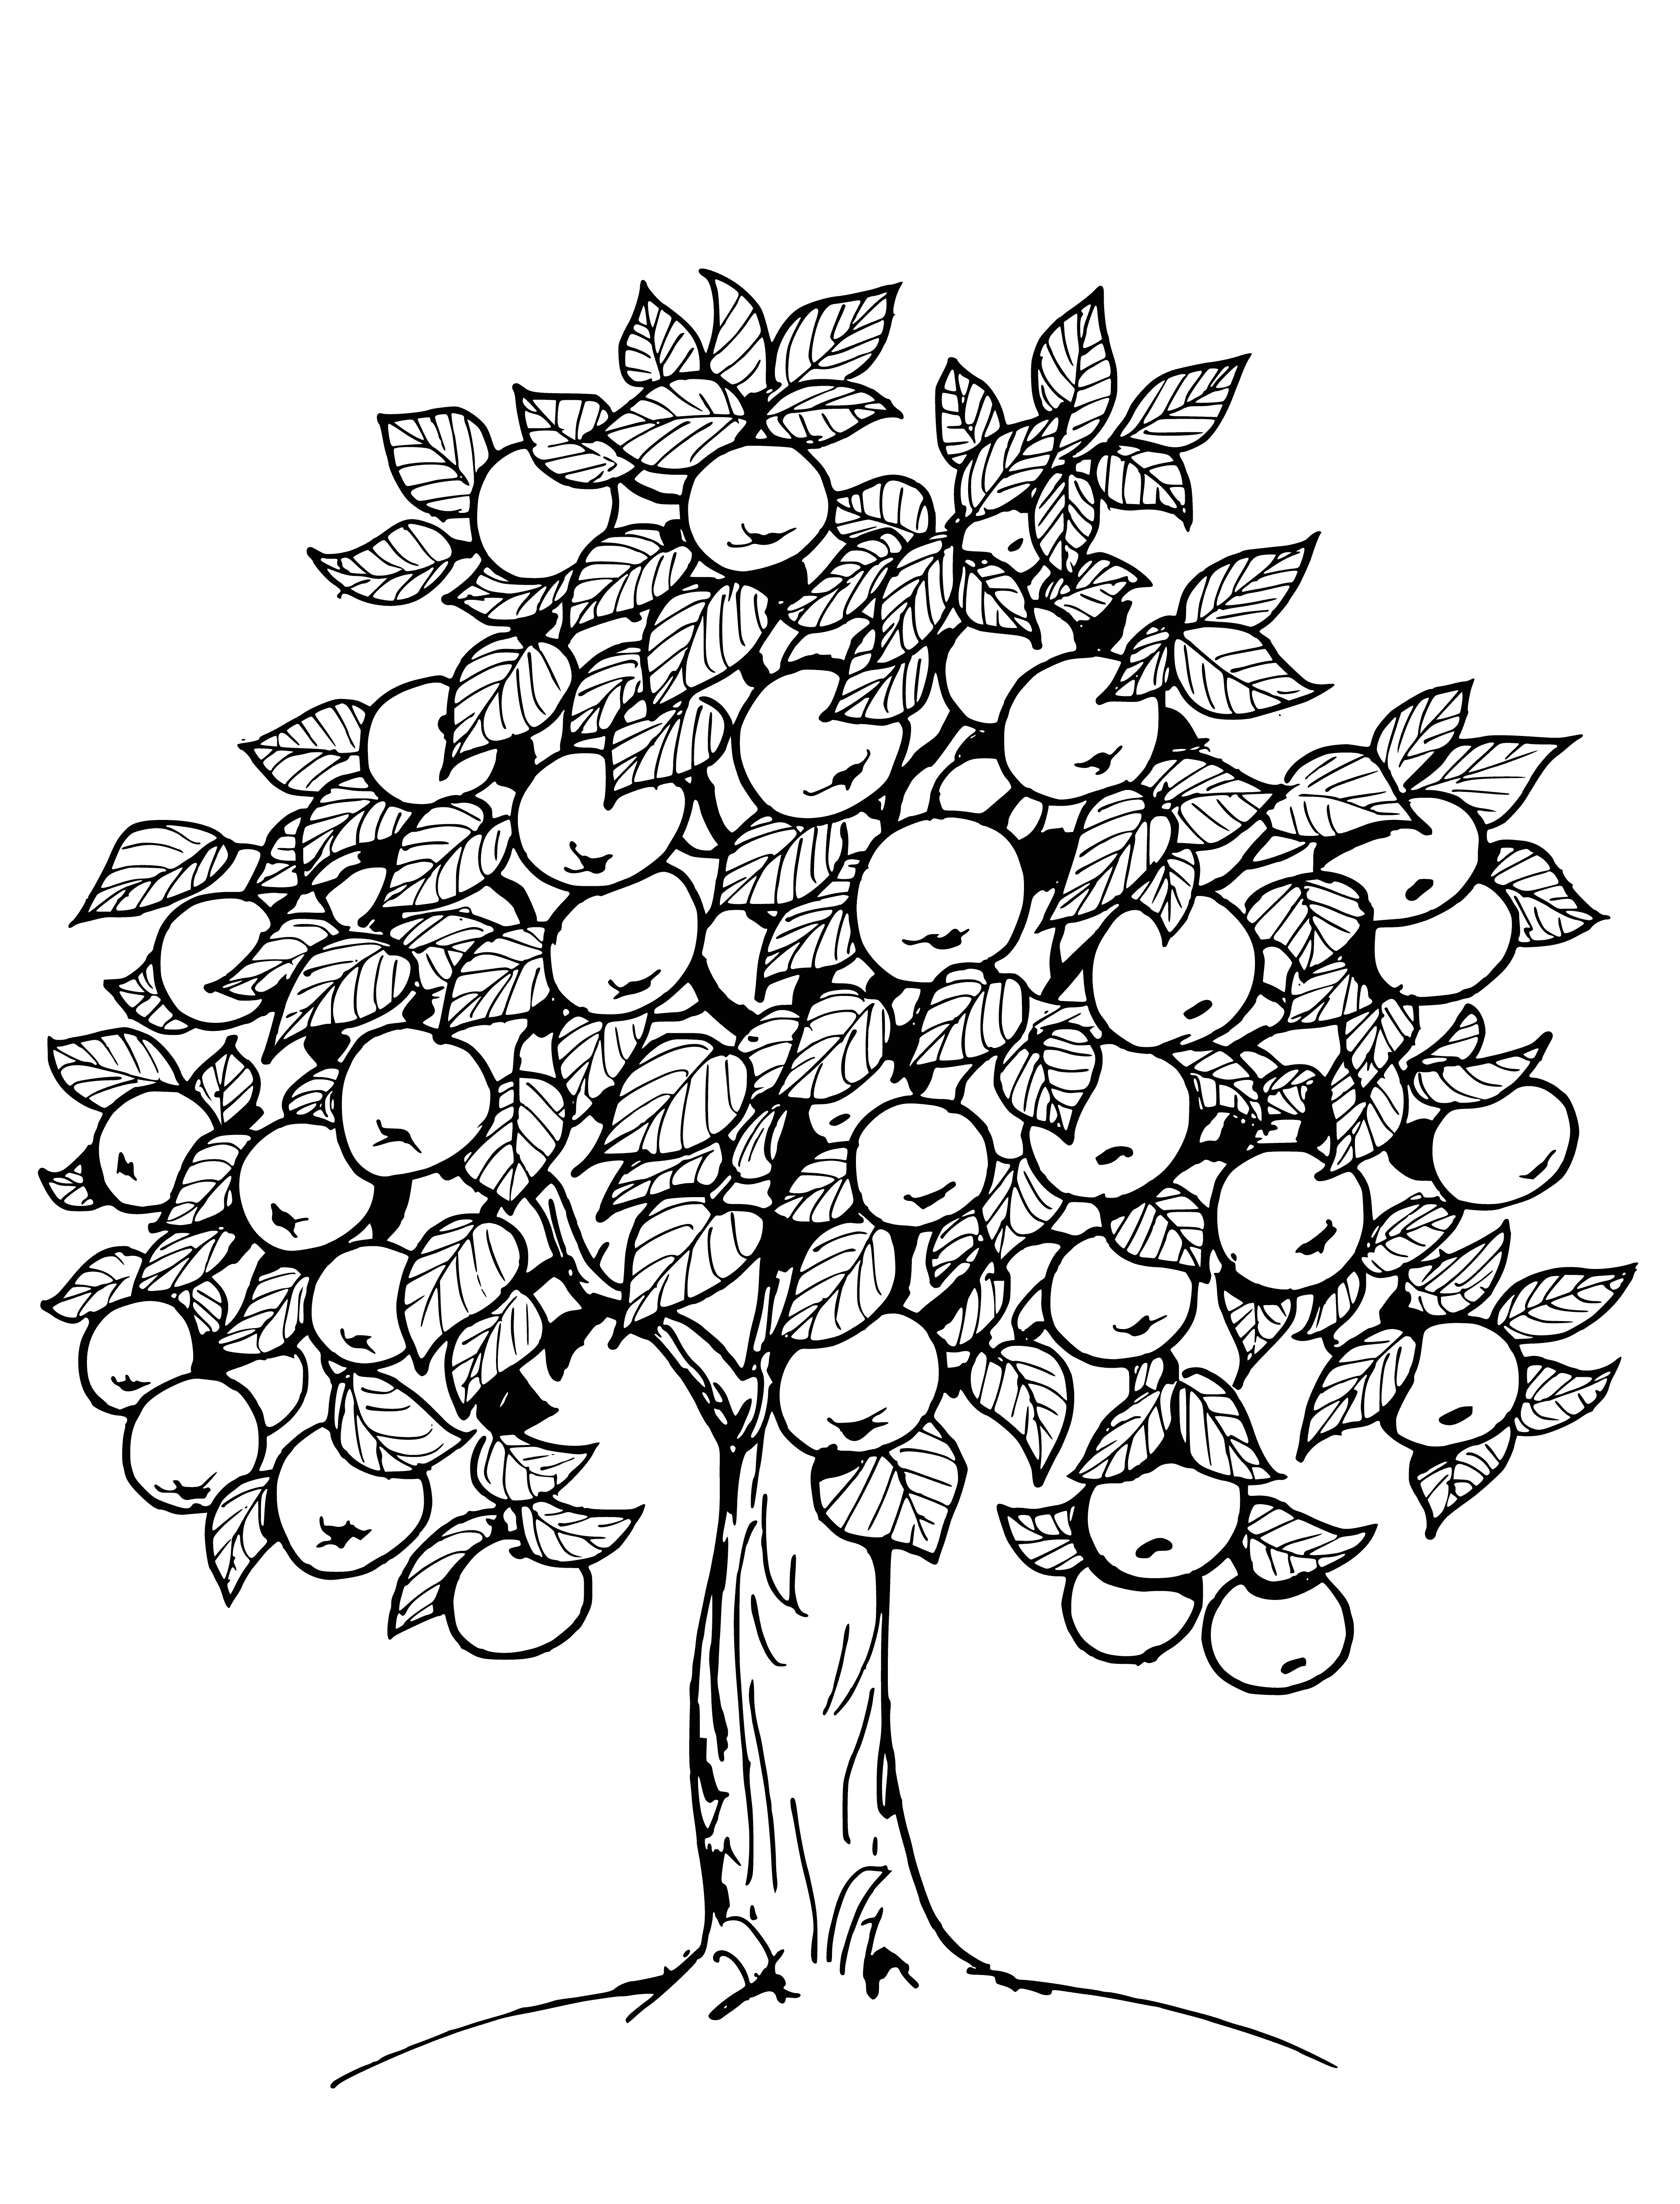 coloring page: Woman & man stand next to apple tree. Woman holds basket, man knife. Both looking at apples on tree.